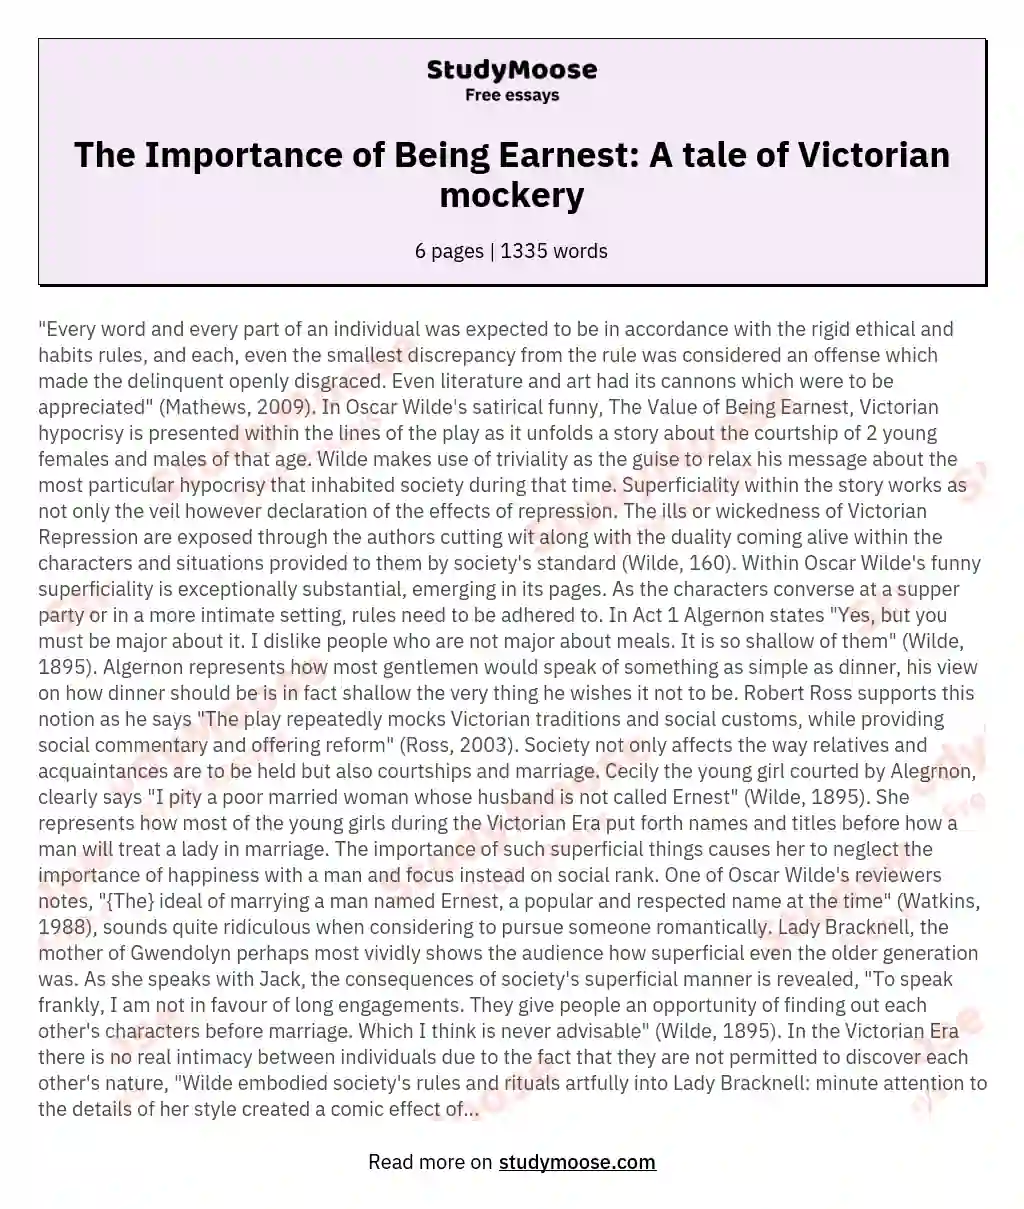 The Importance of Being Earnest: A tale of Victorian mockery essay